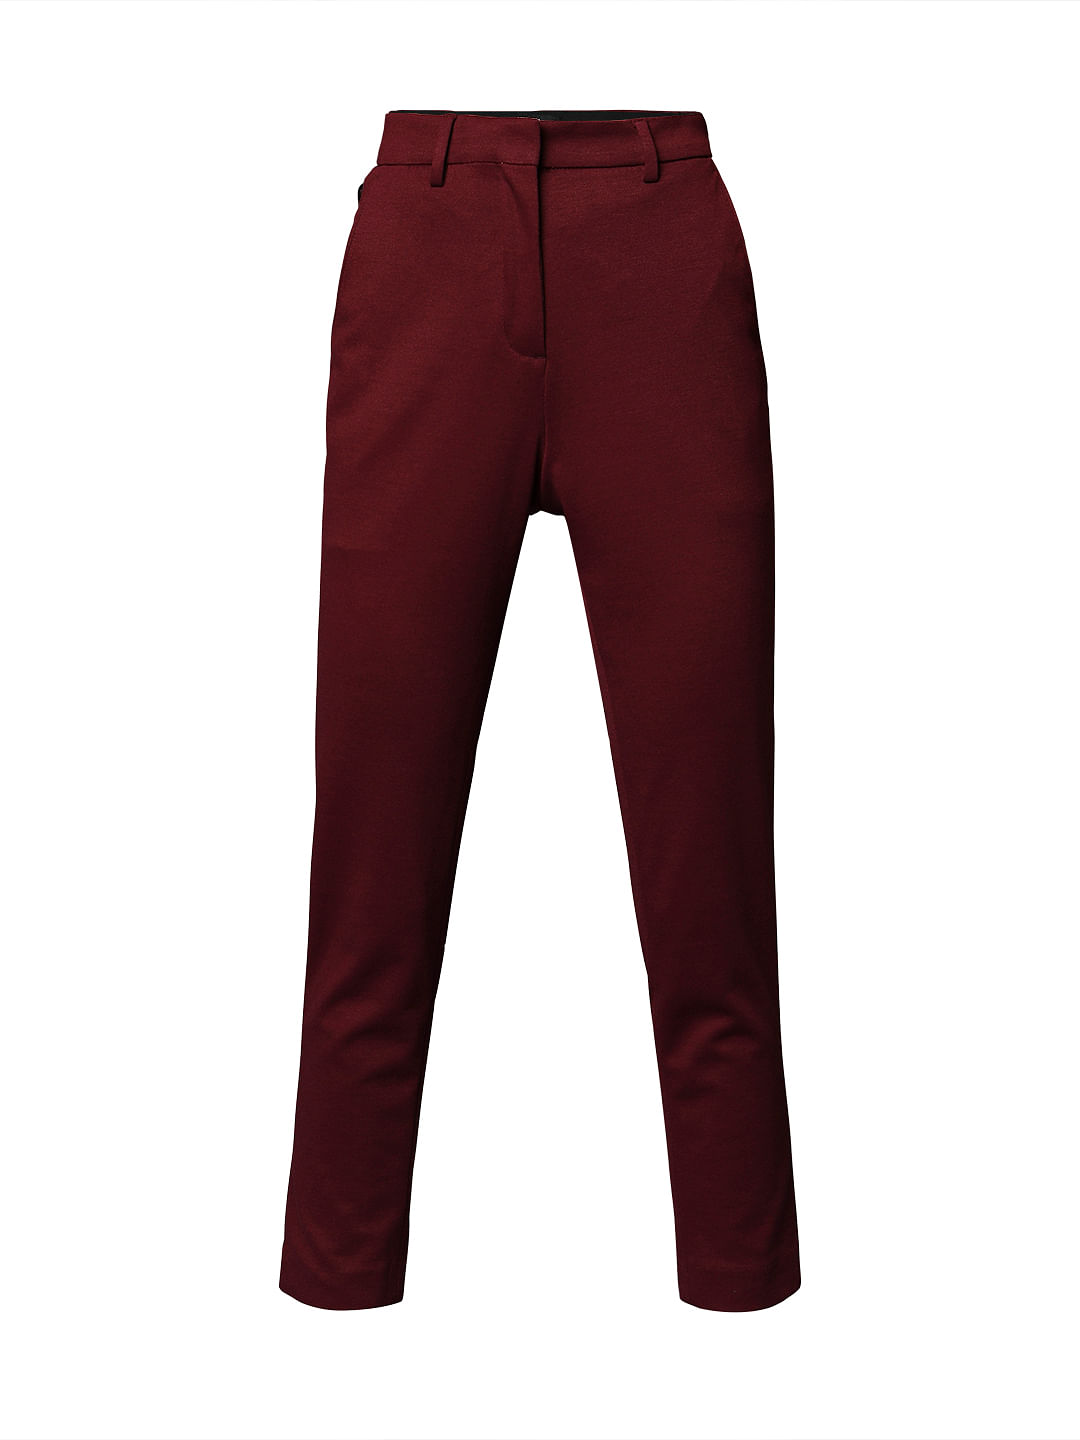 Presidio Airline Navy Pants Tailored Fit | Bluffworks